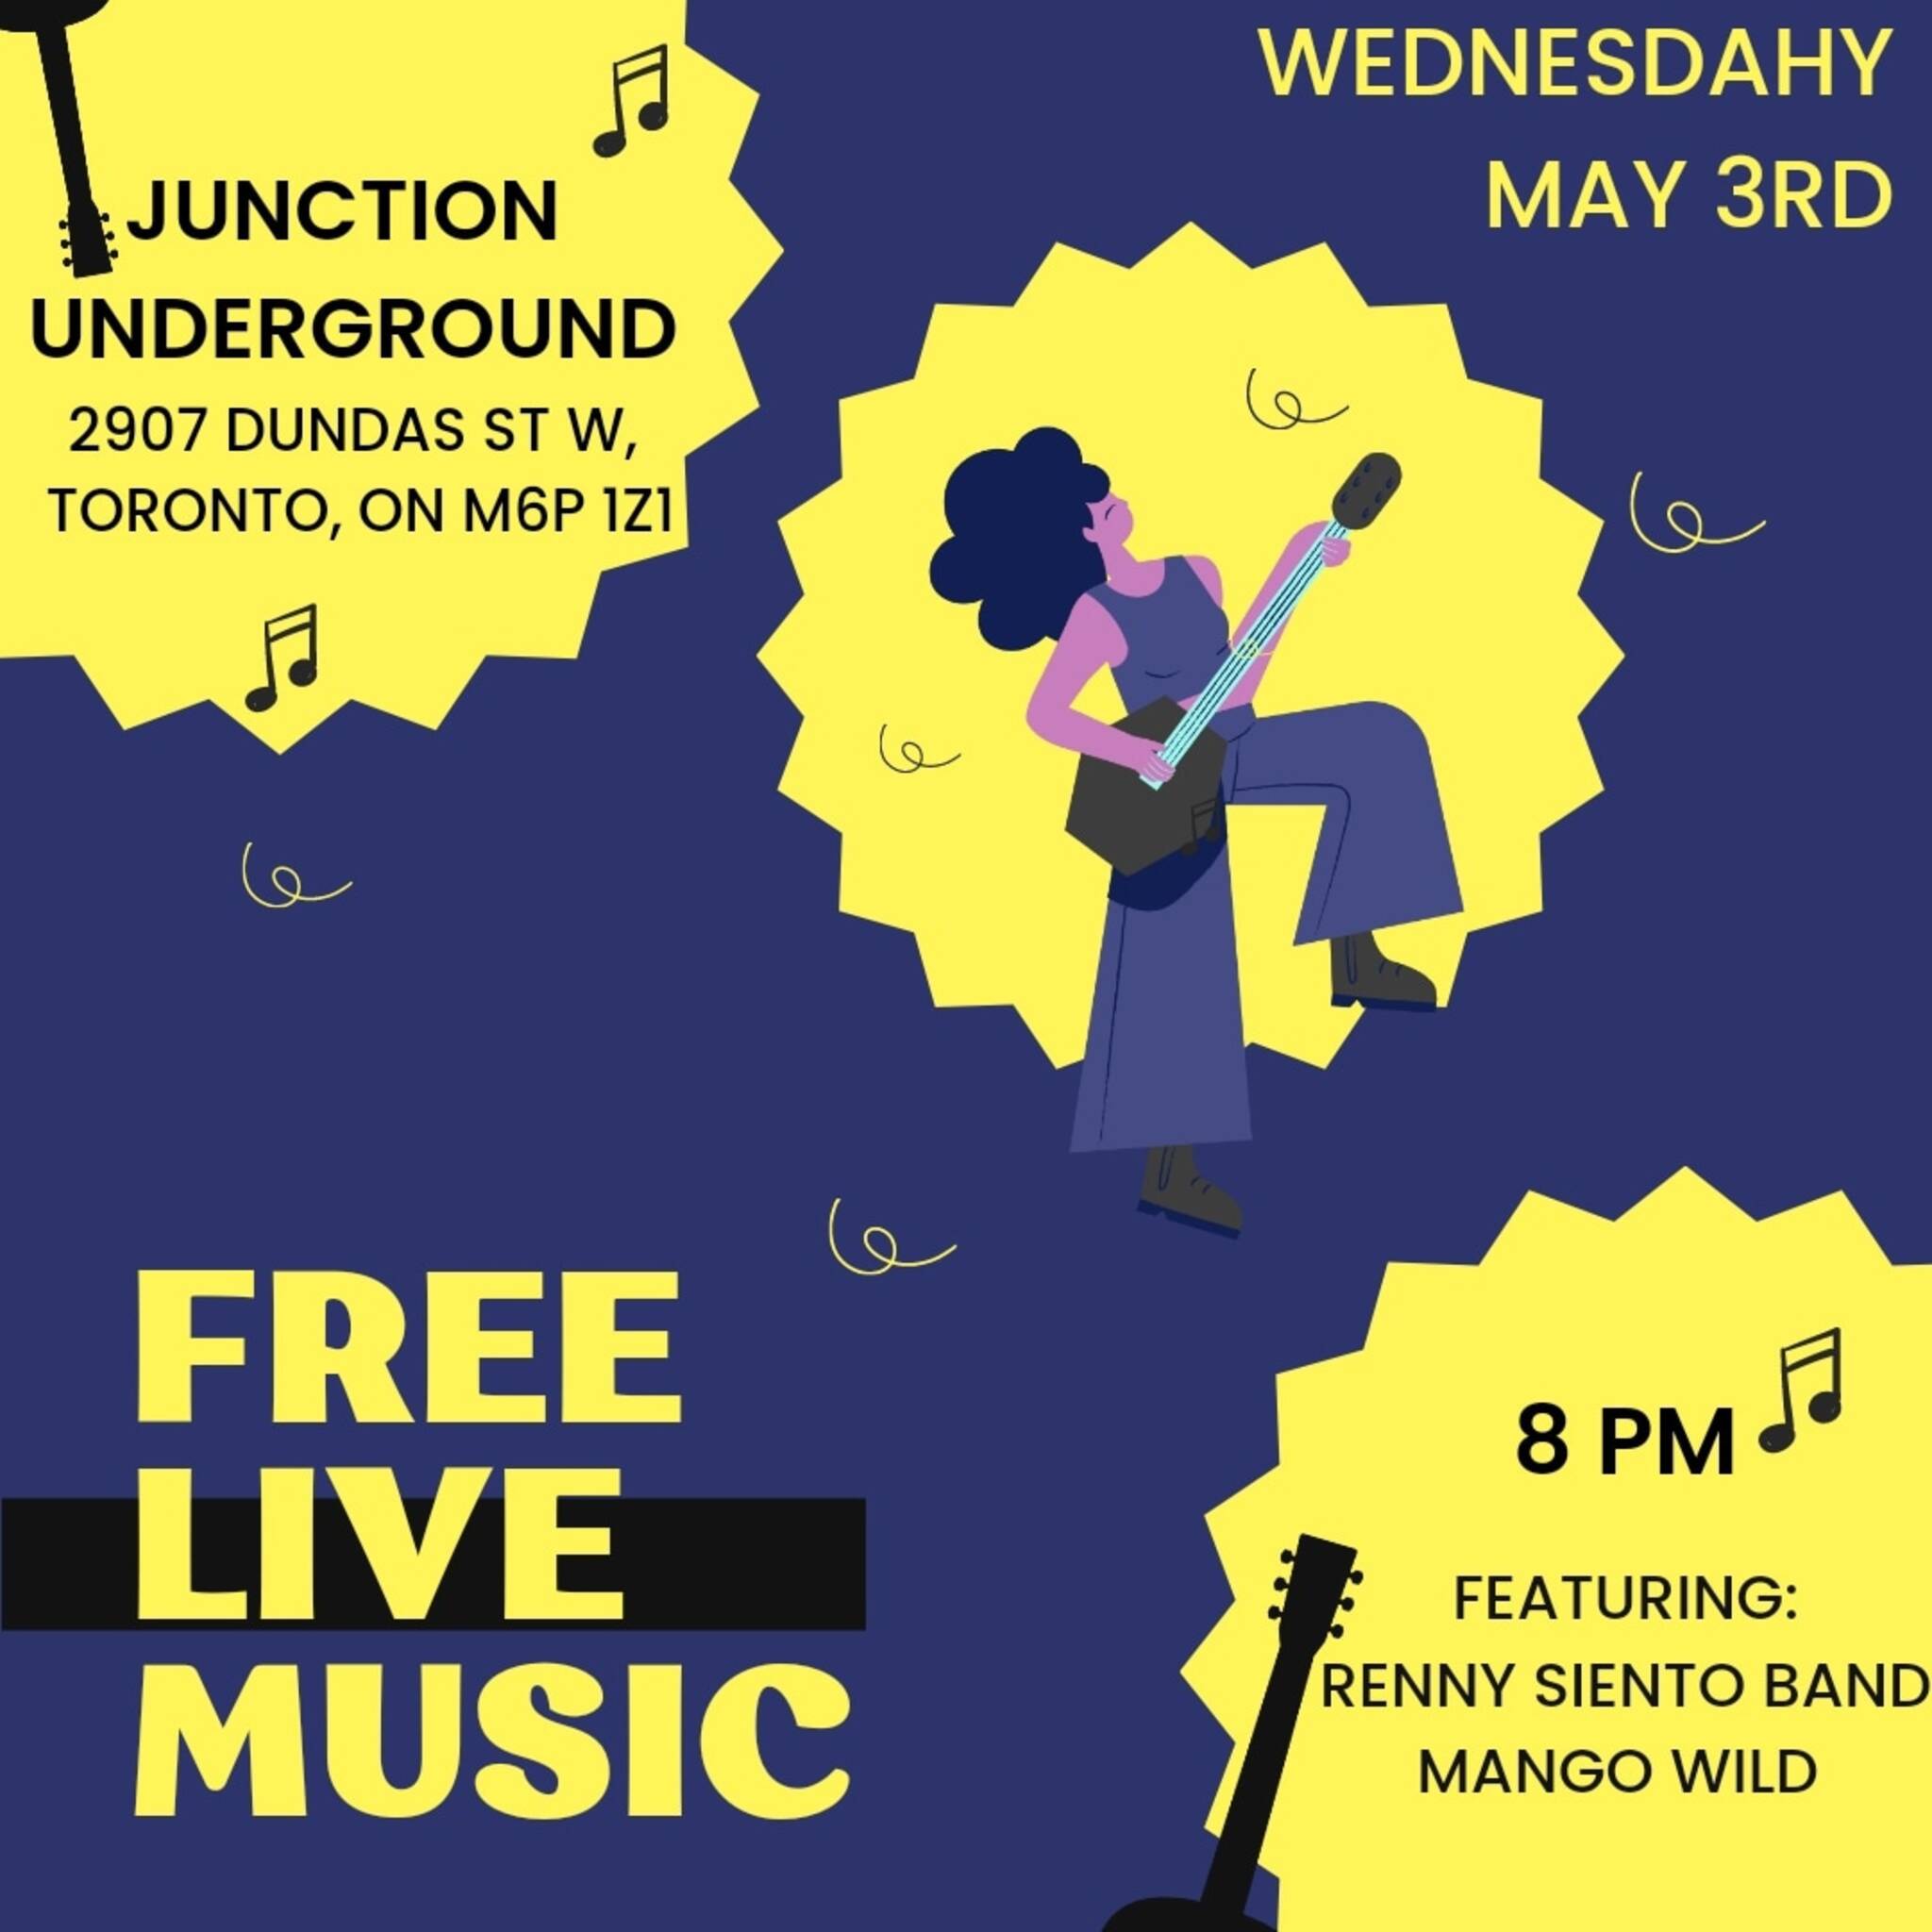 Free Music in the Junction!